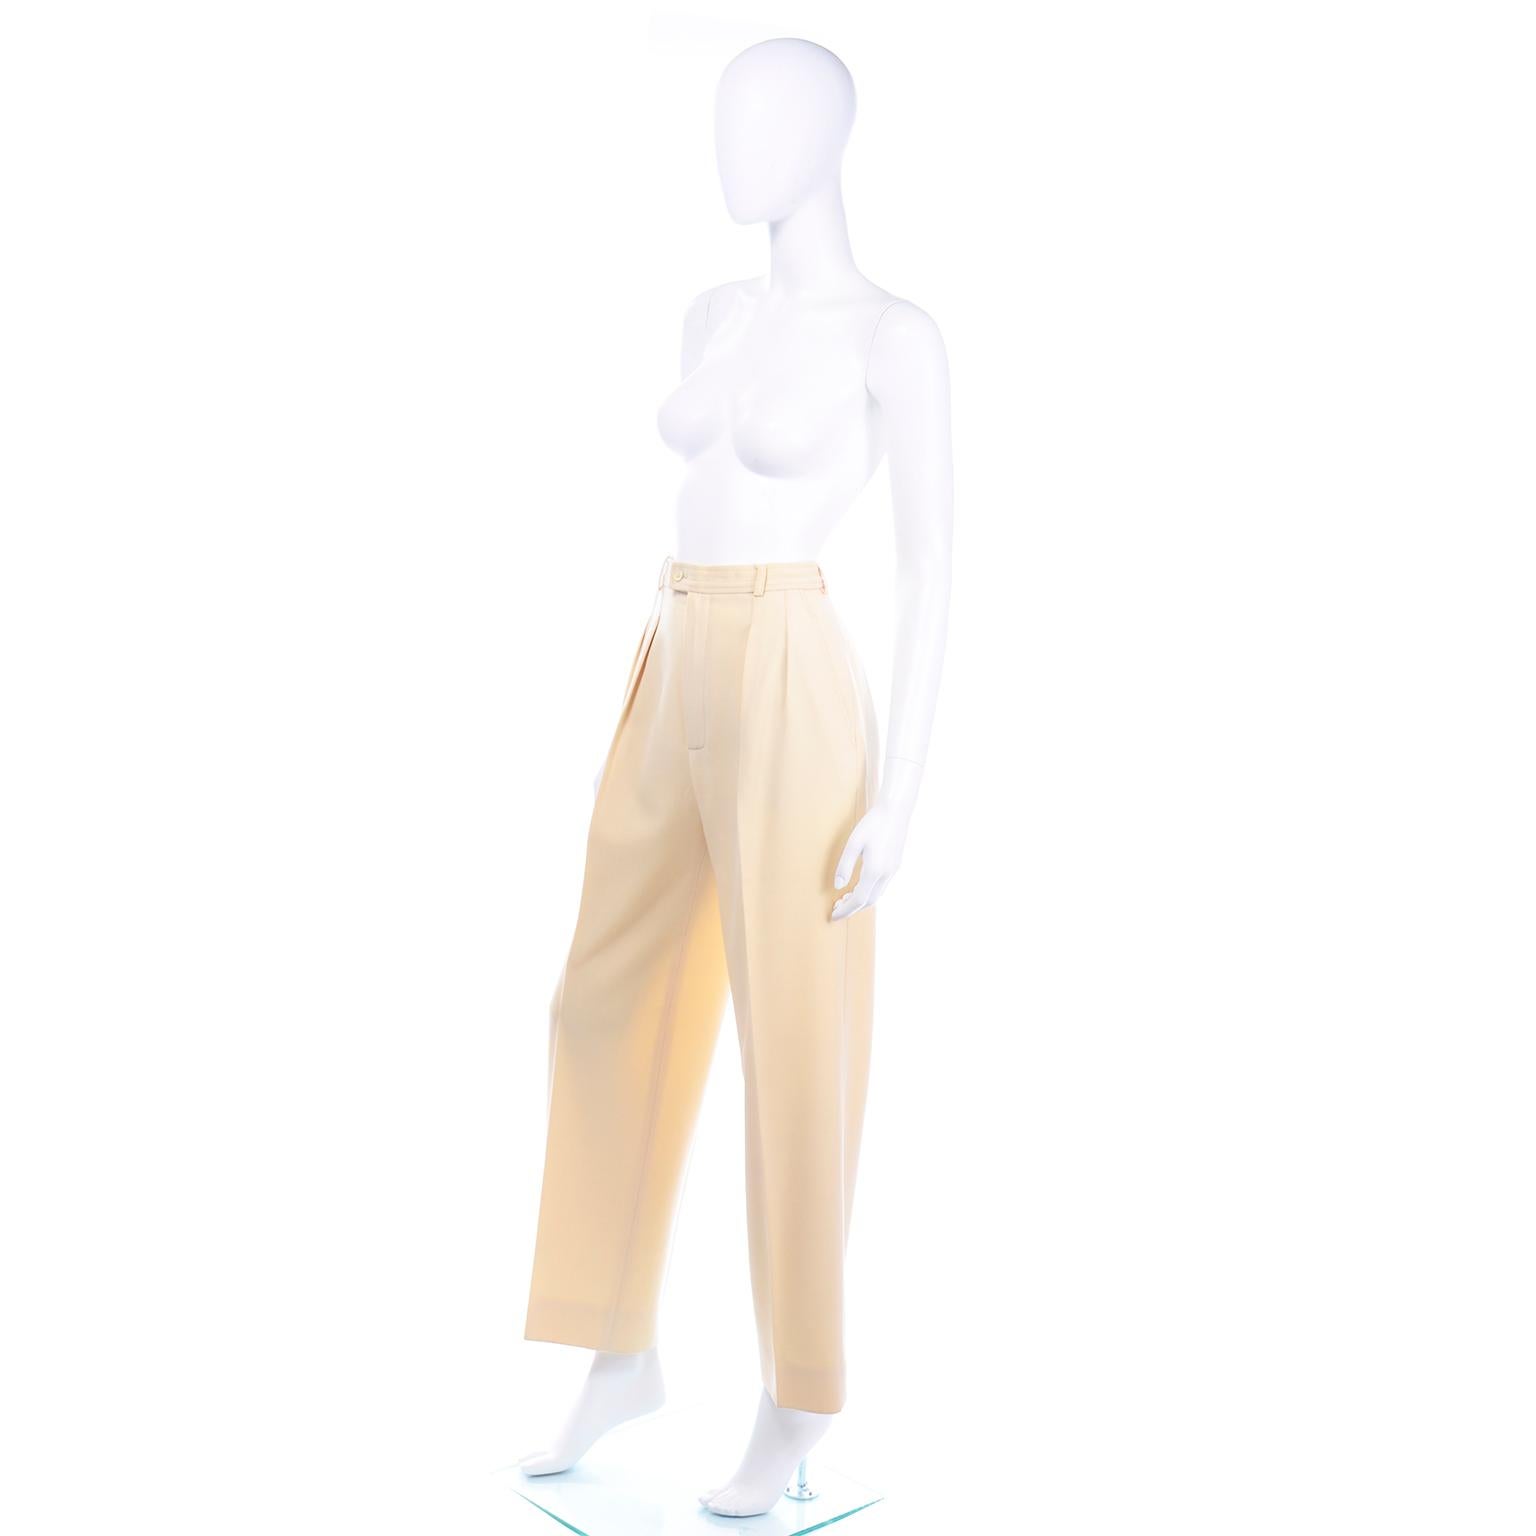 White Yves Saint Laurent Pants Vintage High Waisted Cream Trousers